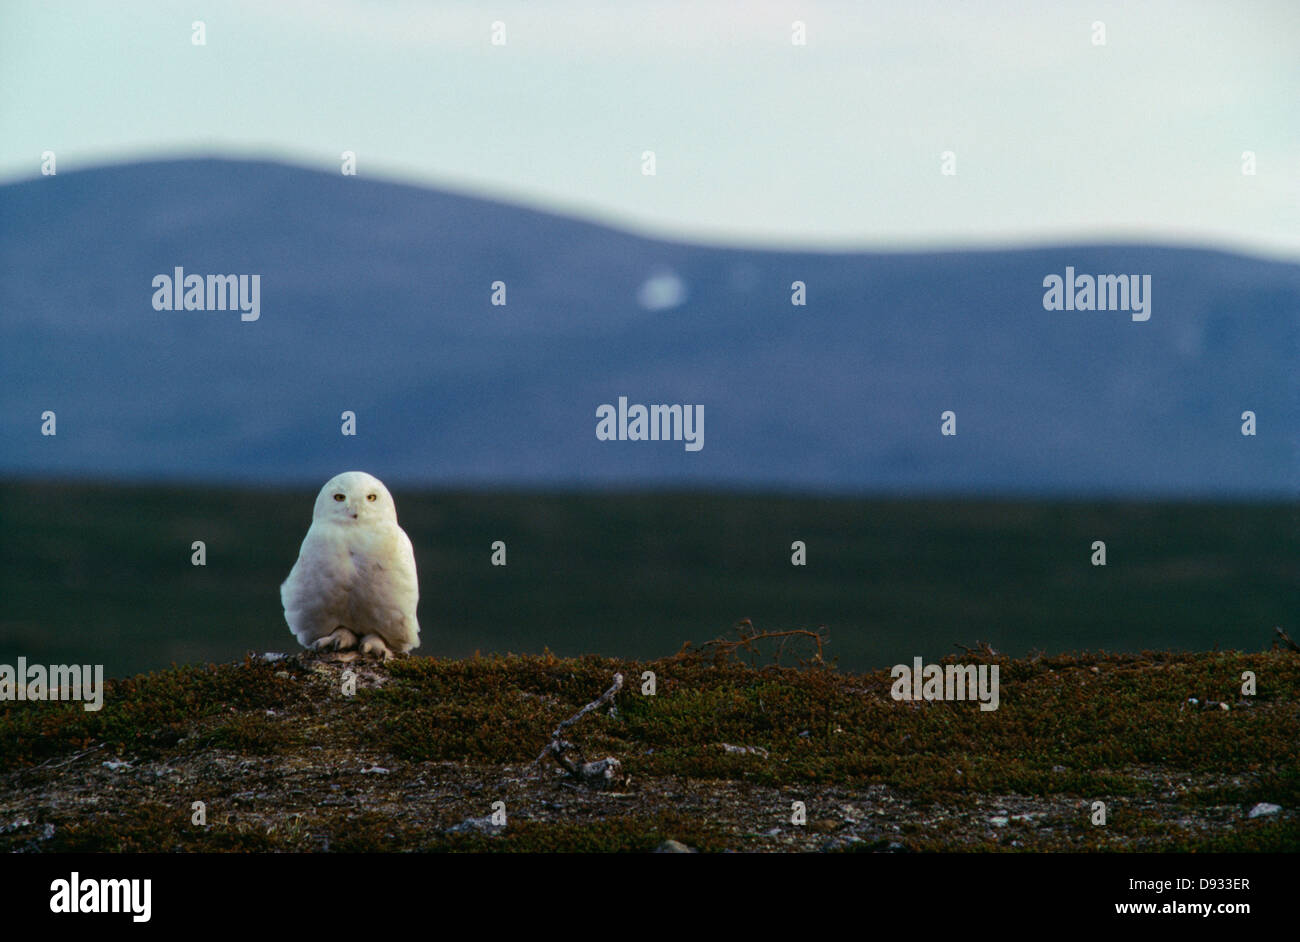 White owl with mountains in background Stock Photo